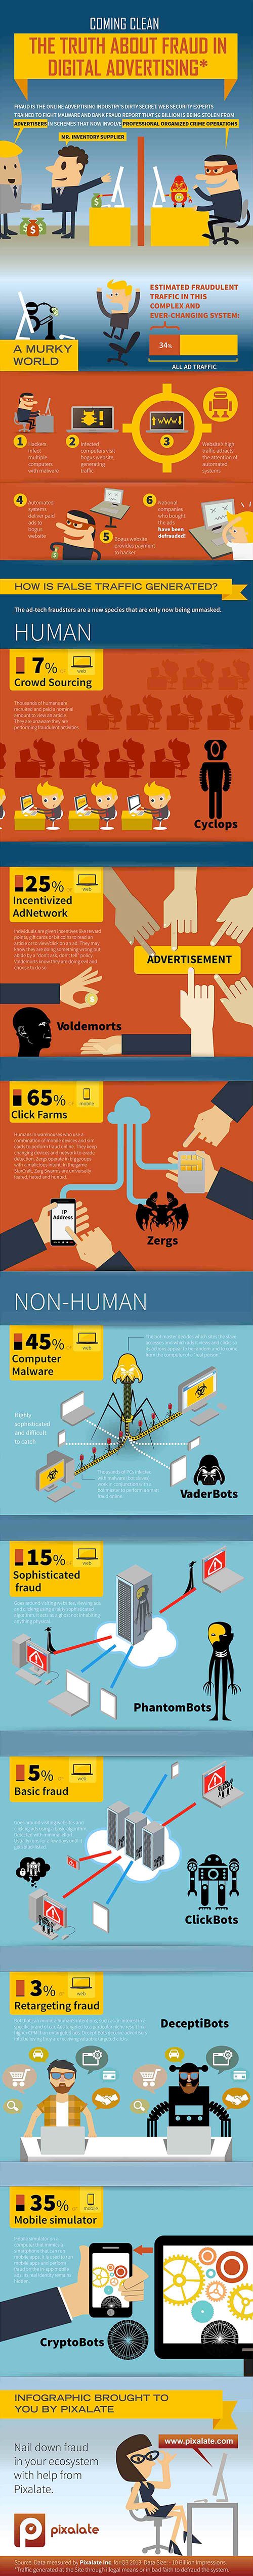 Infographic ad fraud sources